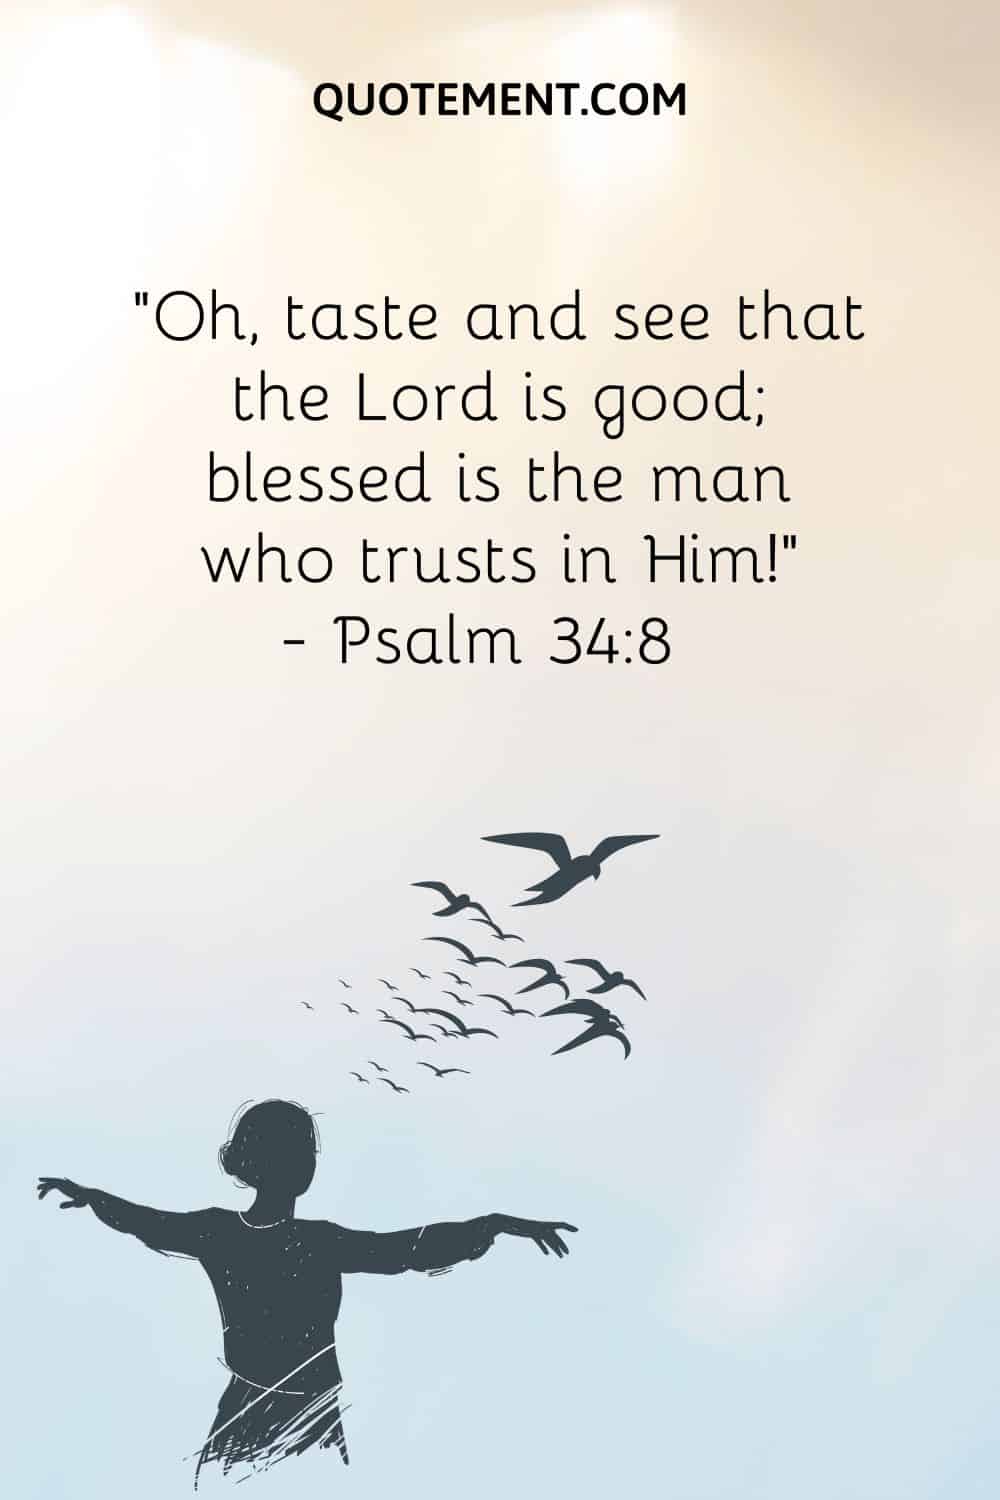 “Oh, taste and see that the Lord is good; blessed is the man who trusts in Him!” ― Psalm 348